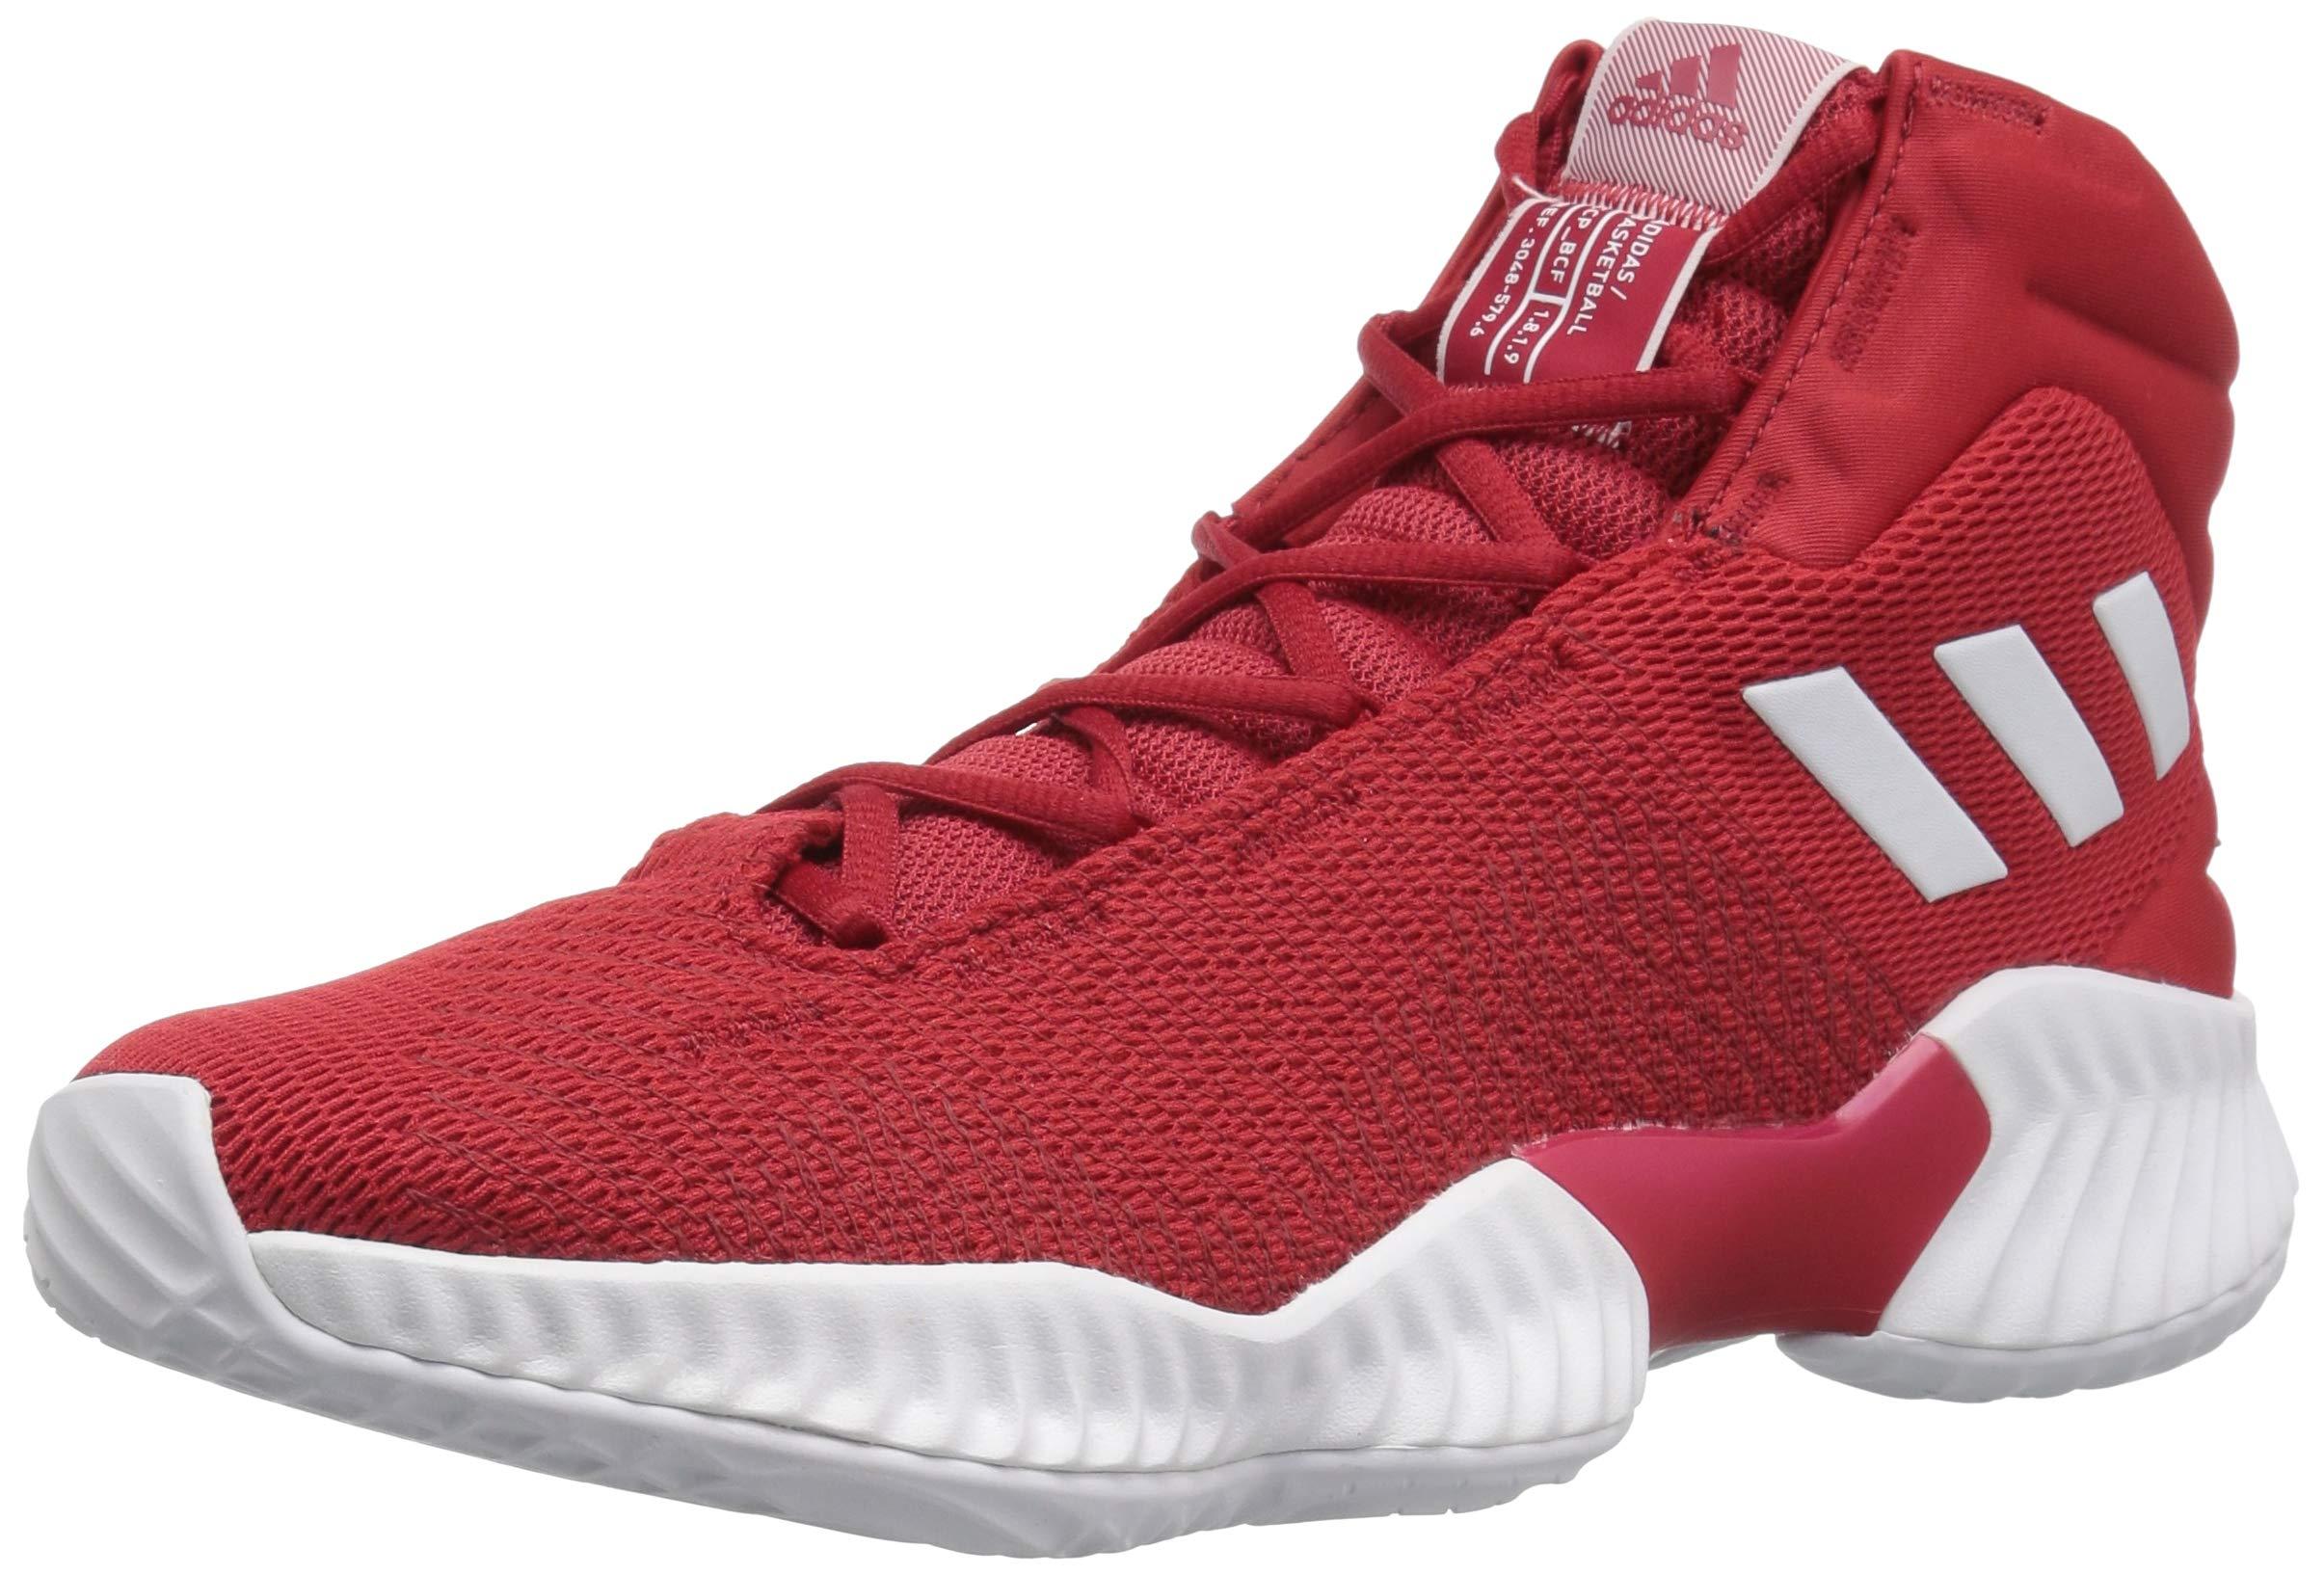 adidas Rubber Pro Bounce 2018 Basketball Shoe in Red for Men ...